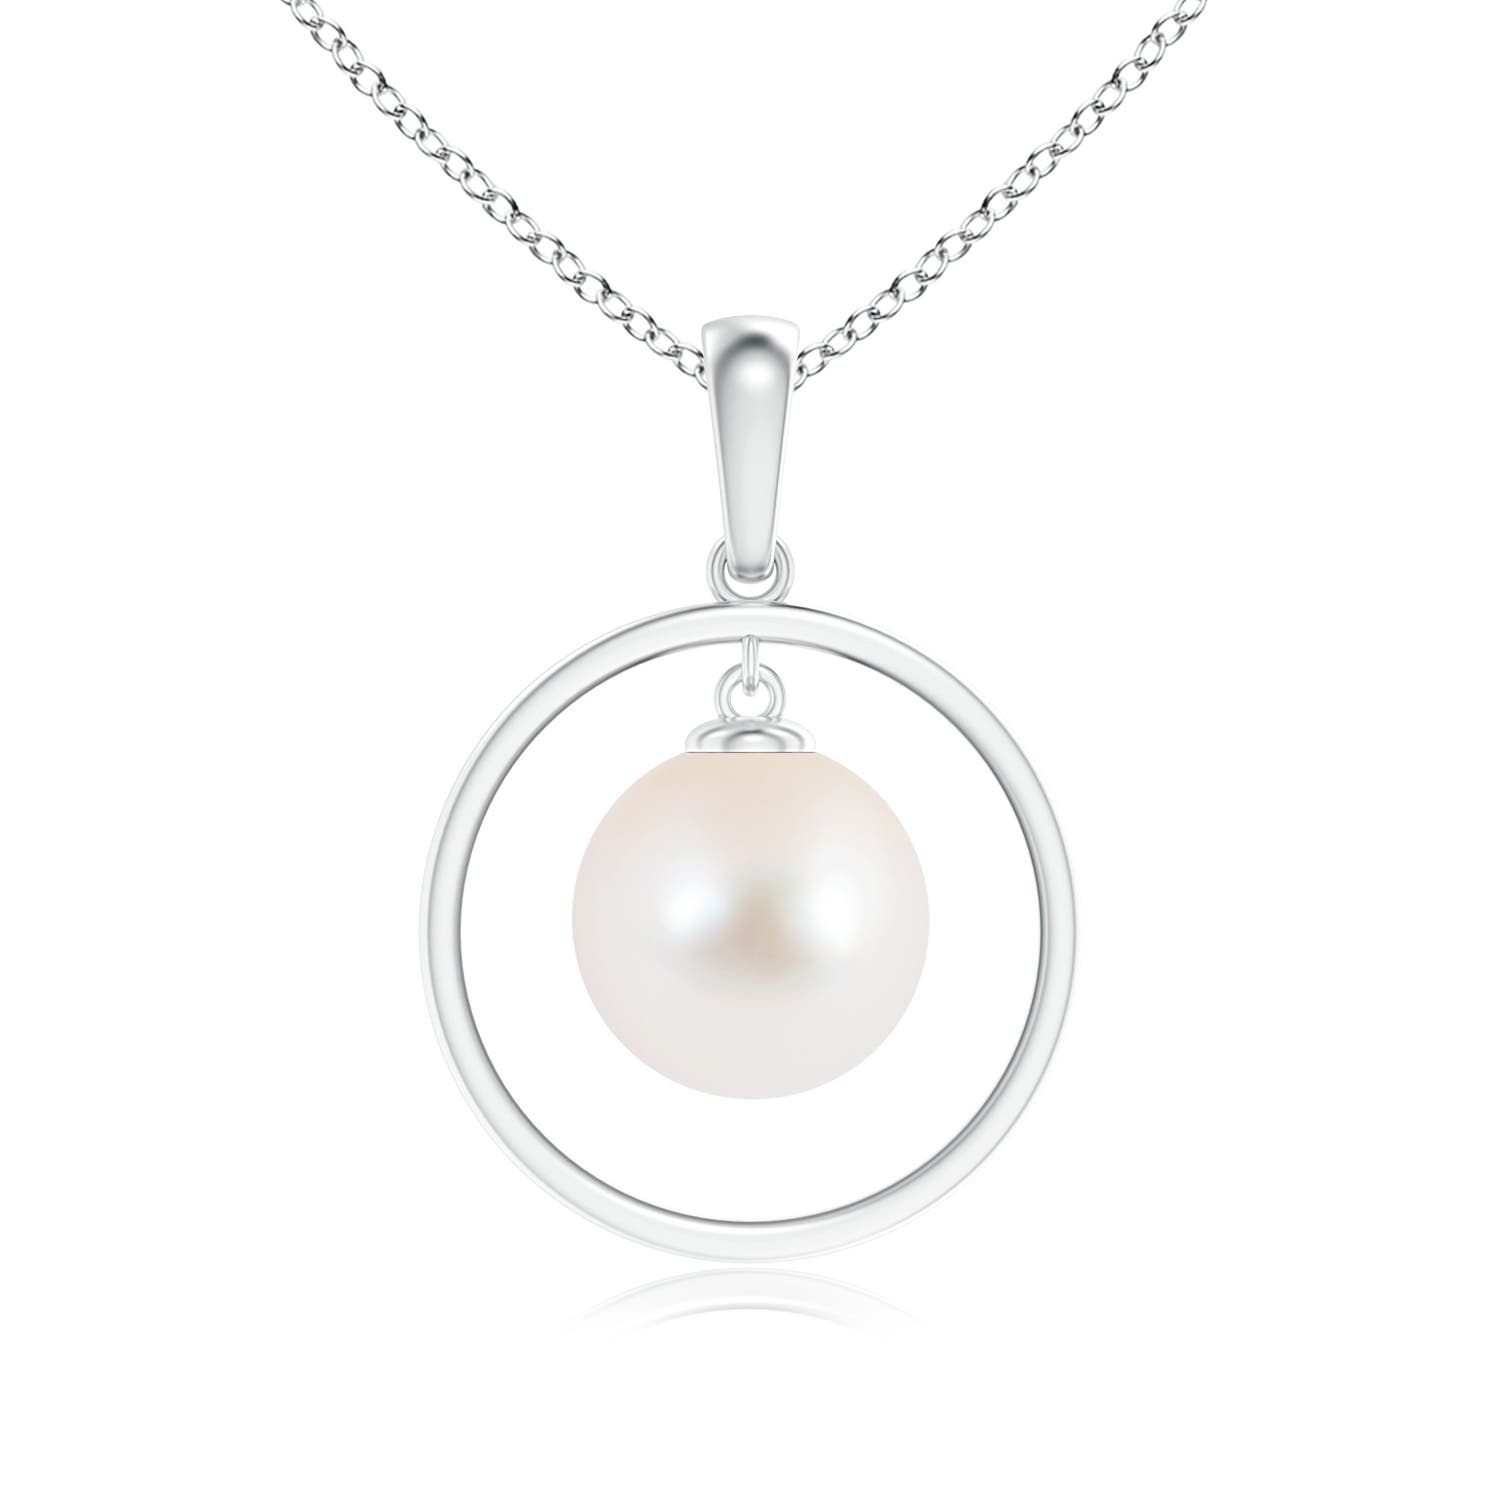 AAA - Freshwater Cultured Pearl / 5.25 CT / 14 KT White Gold